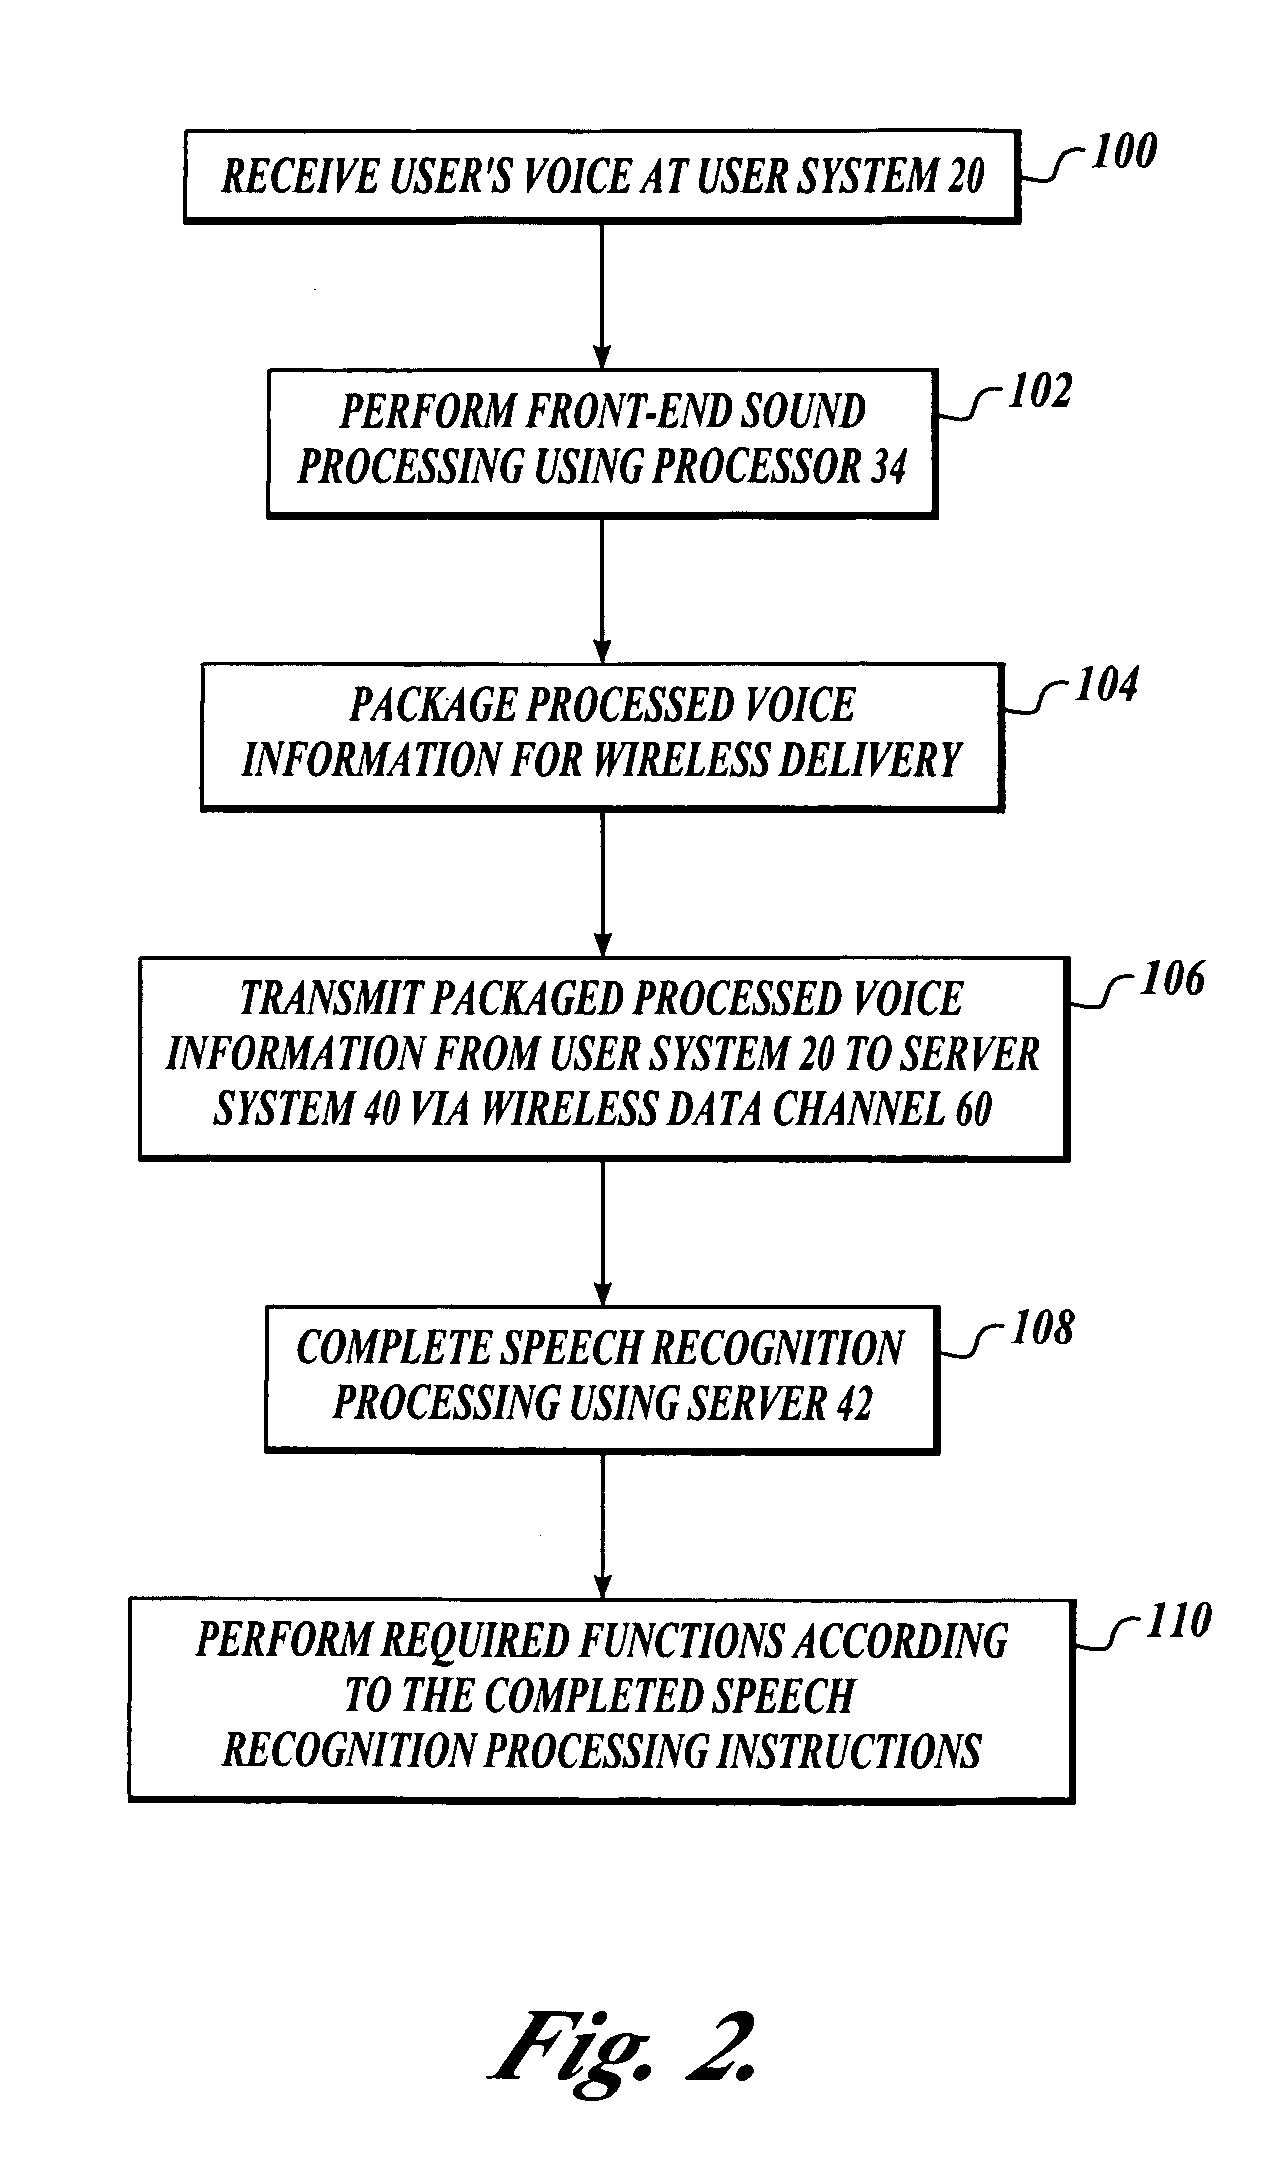 System and method for transmitting voice input from a remote location over a wireless data channel